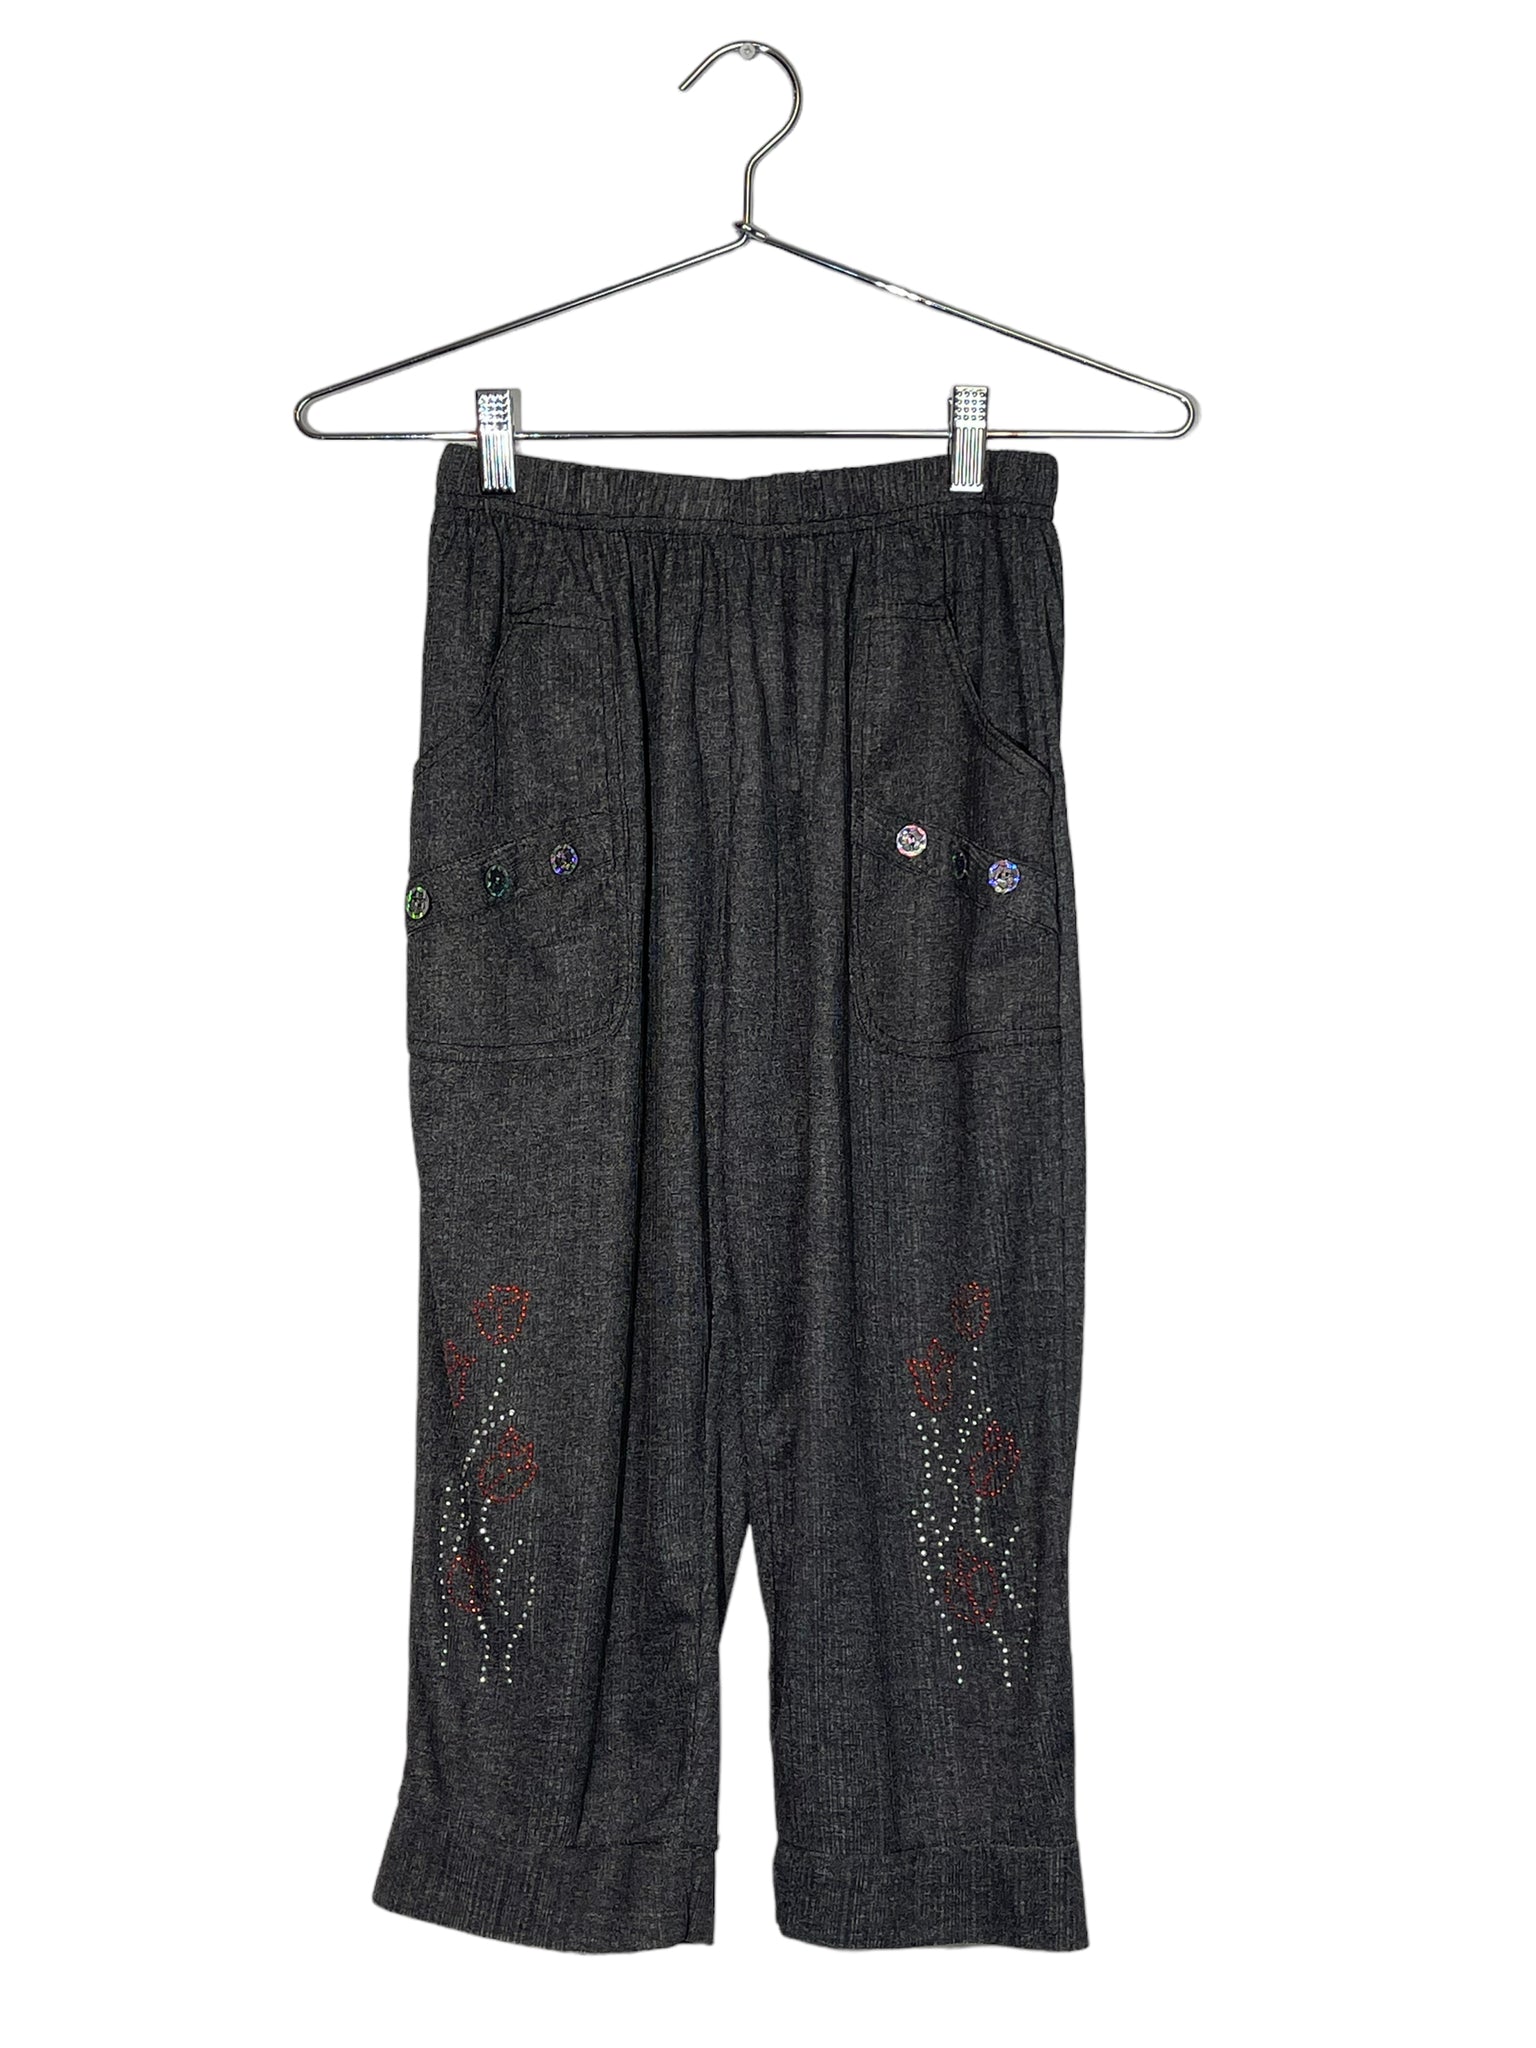 Grey Rose Bedazzled Pants